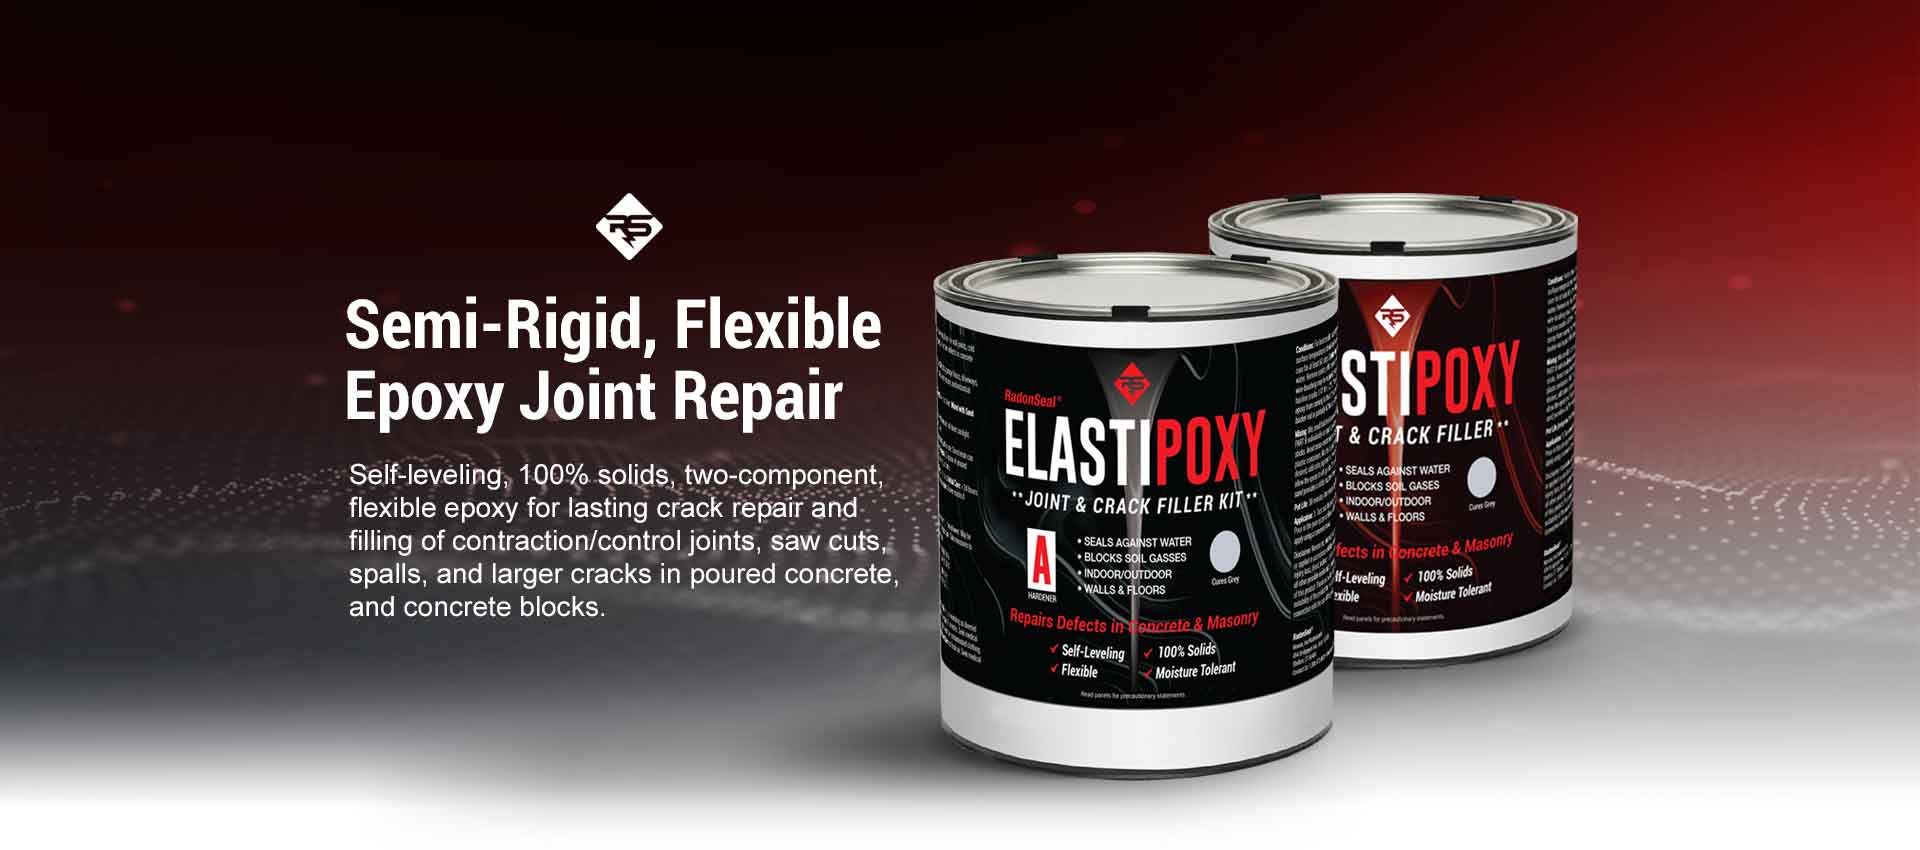 ElastiPoxy Control Joint & Crack filler by RadonSeal